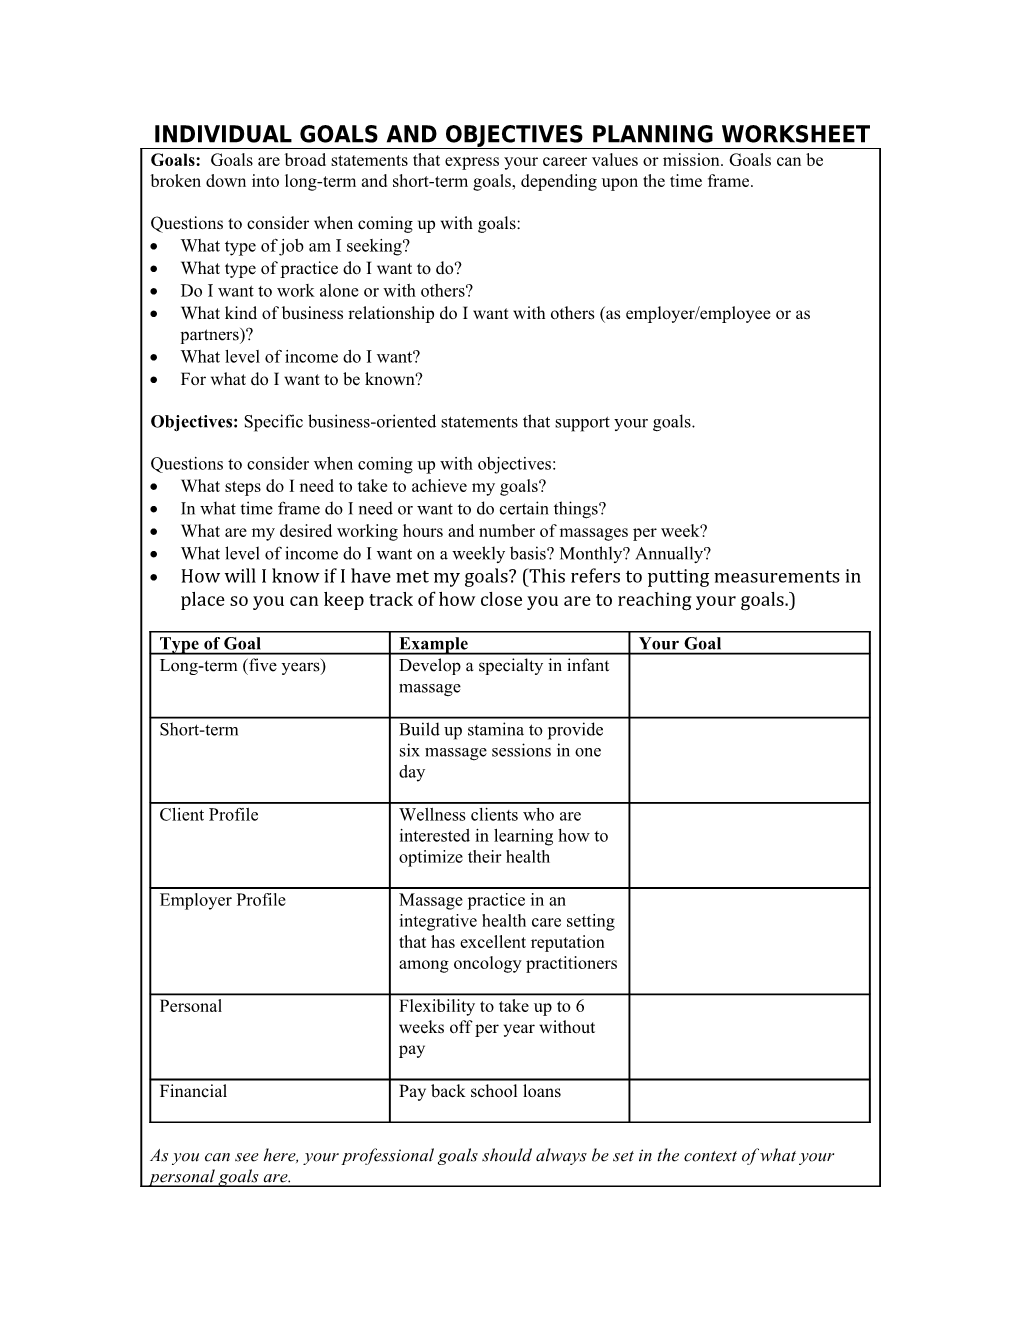 Individual Goals and Objectives Planning Worksheet